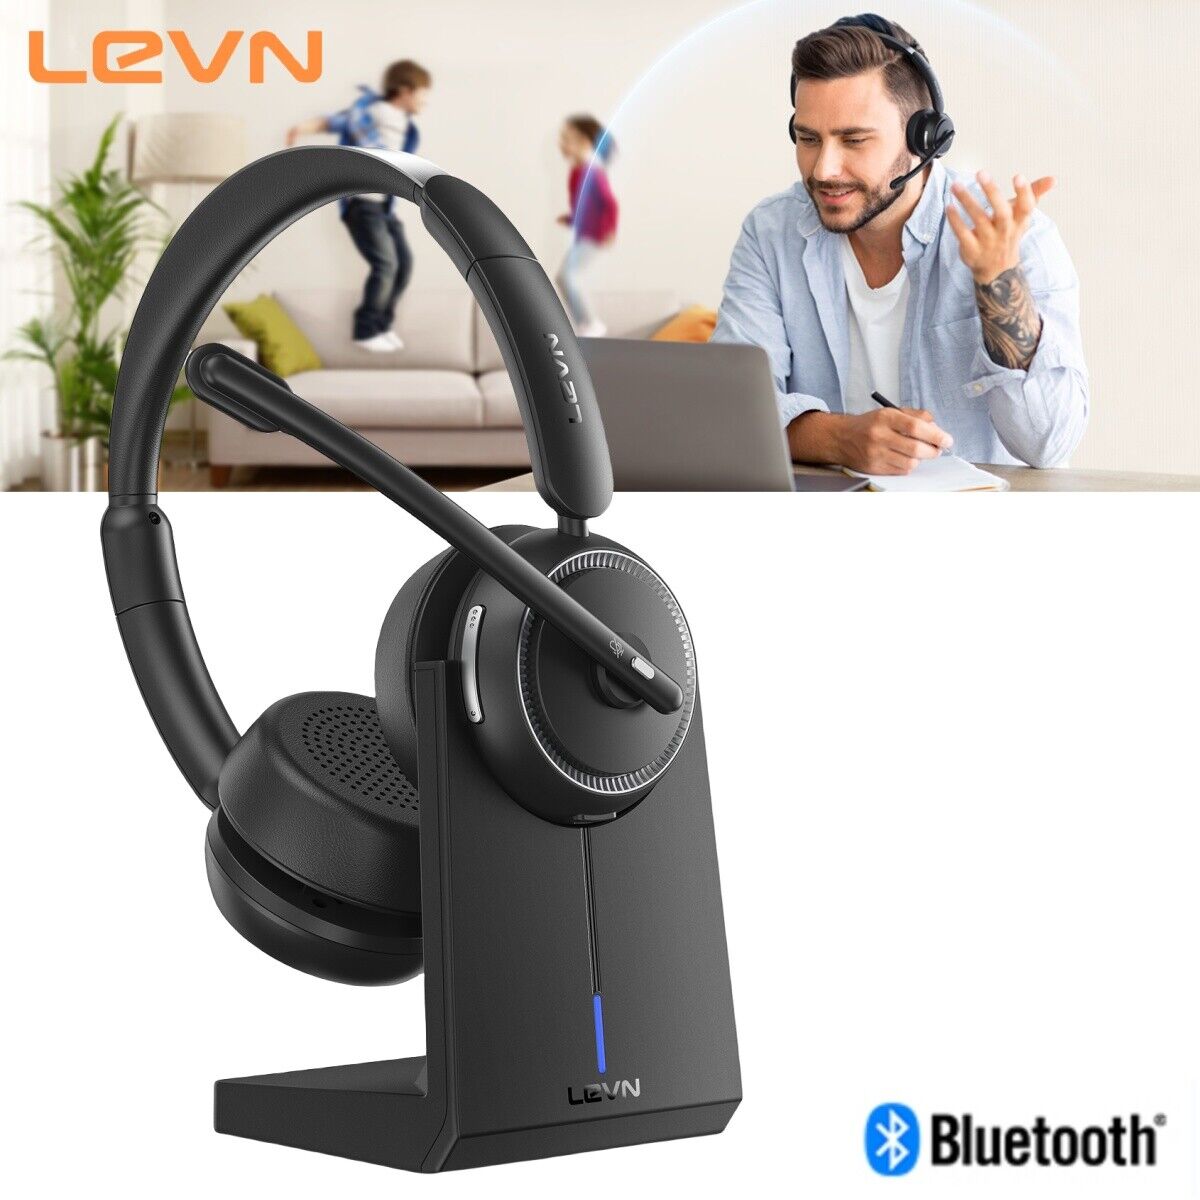 LEVN Bluetooth Wireless Headset, With Noise Canceling Microphone & Charging Base